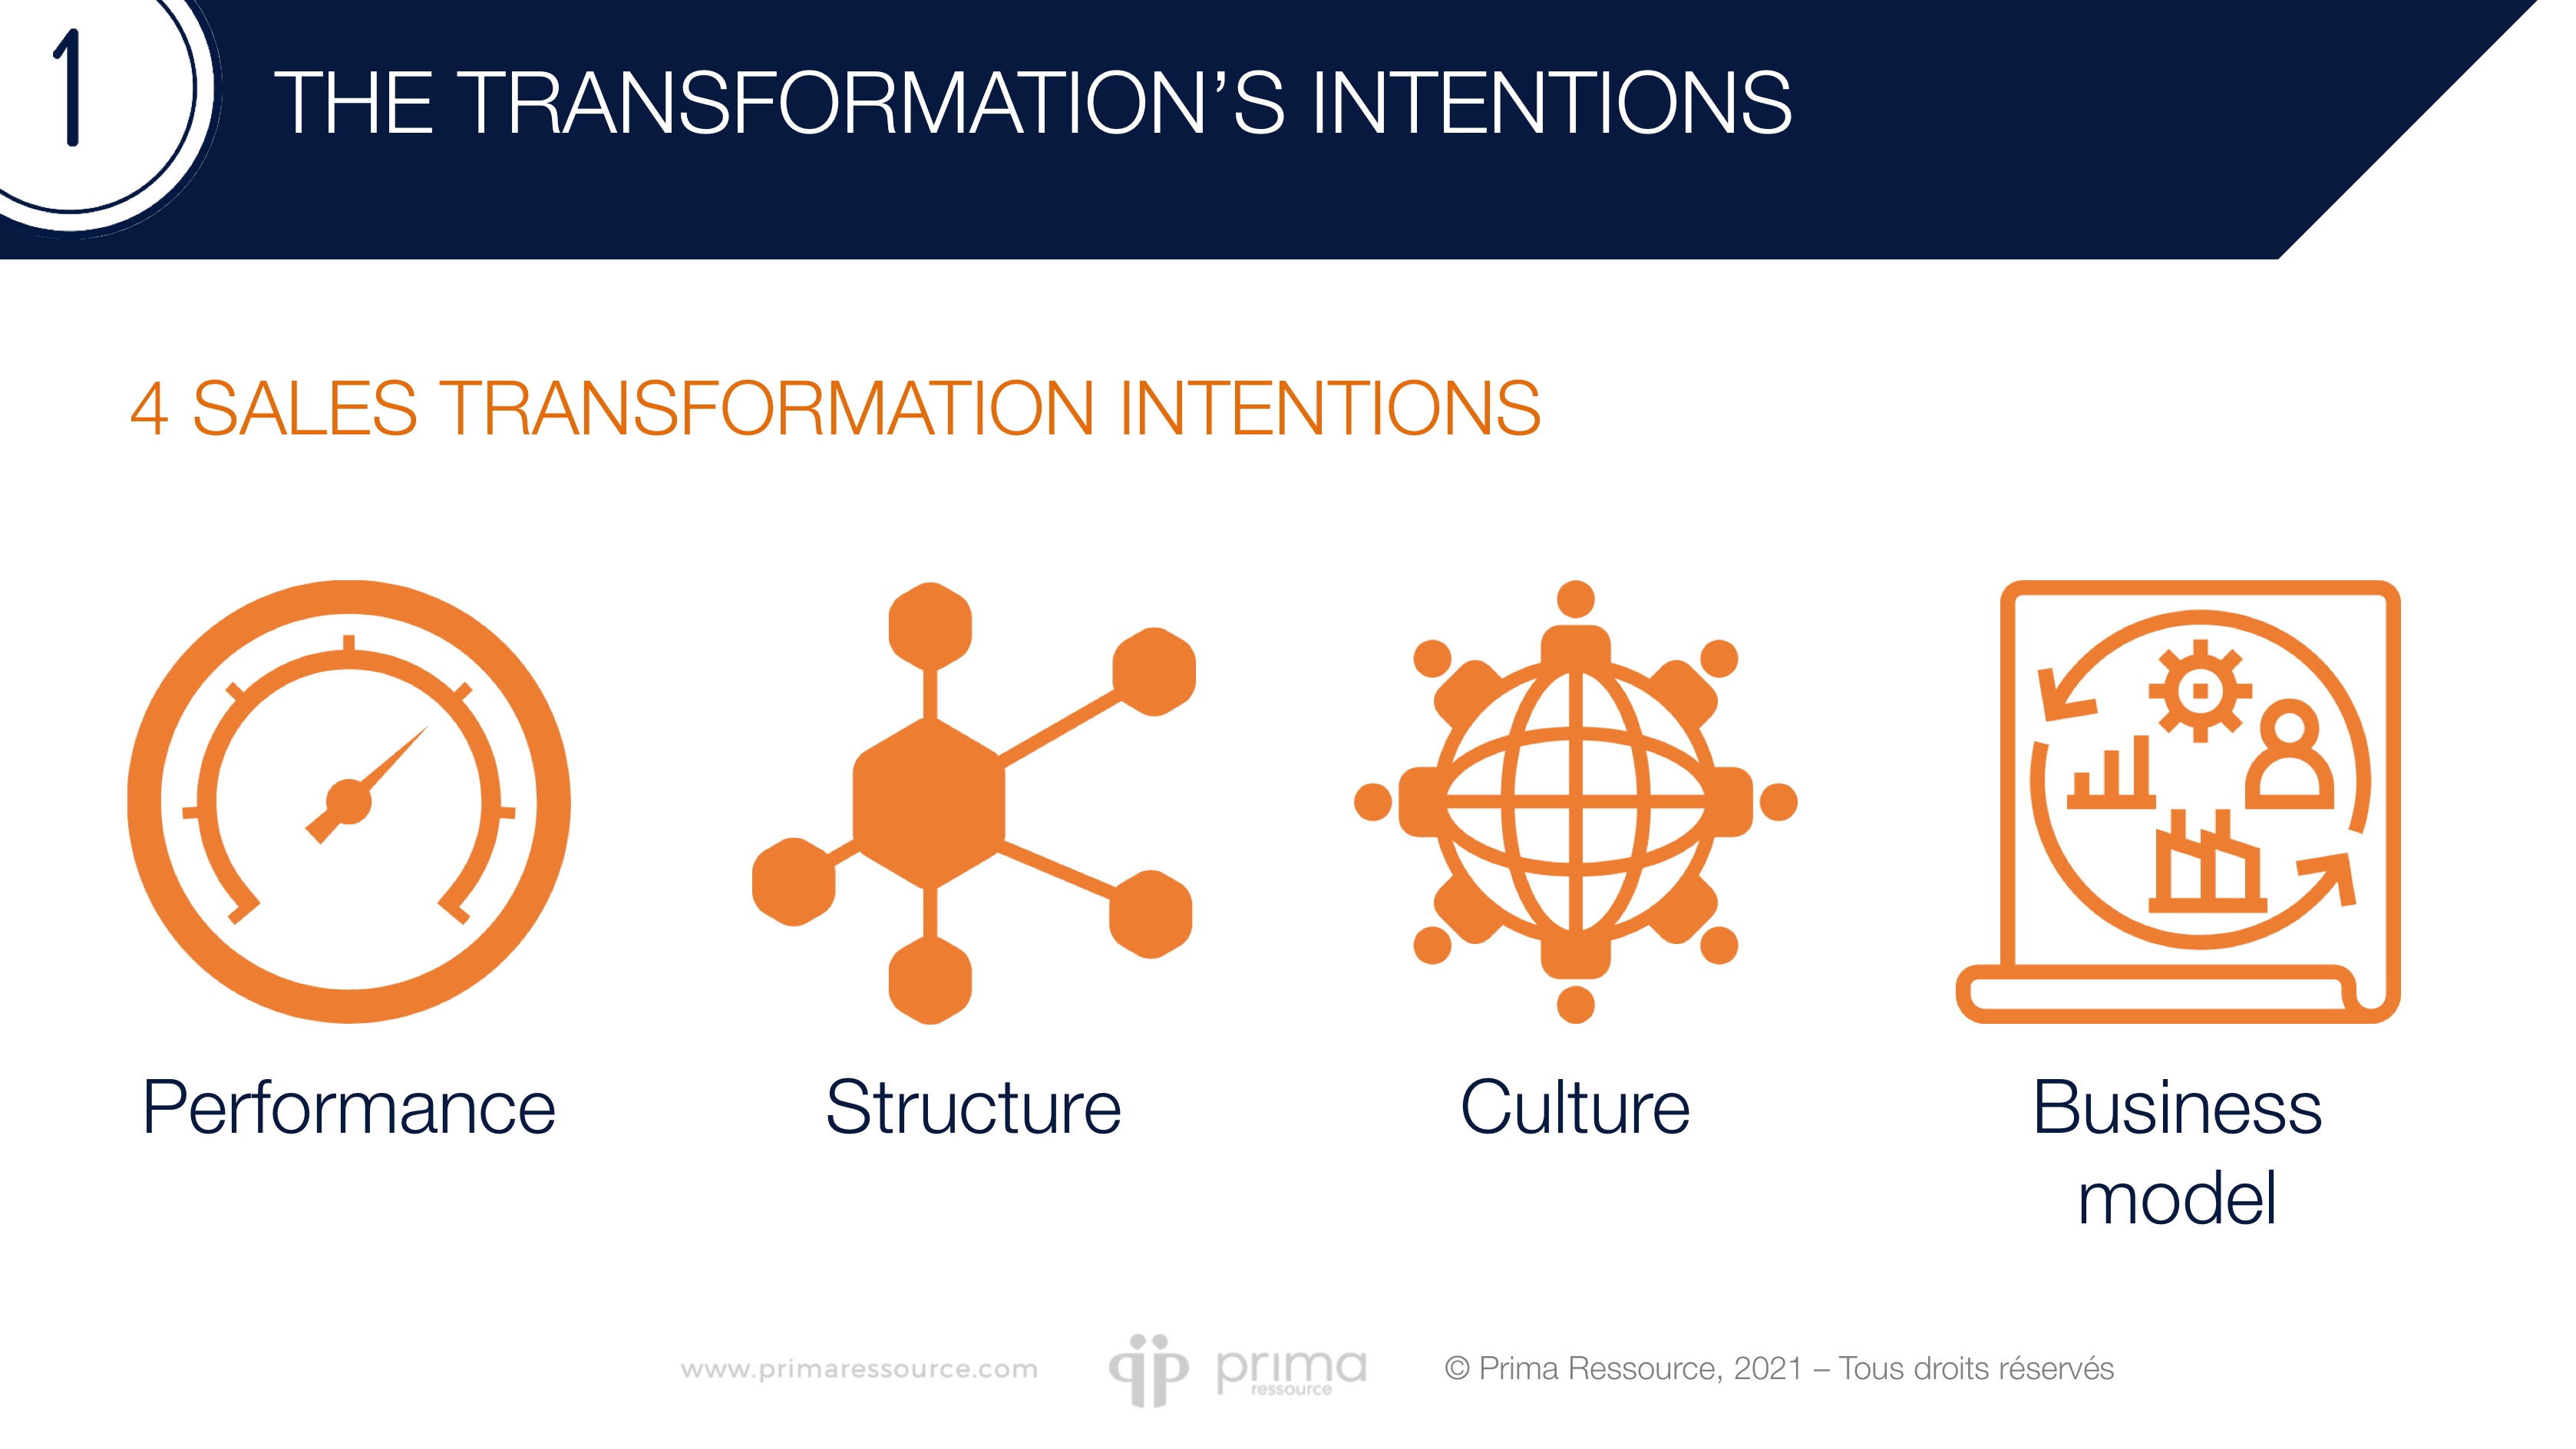 The transformations intentions